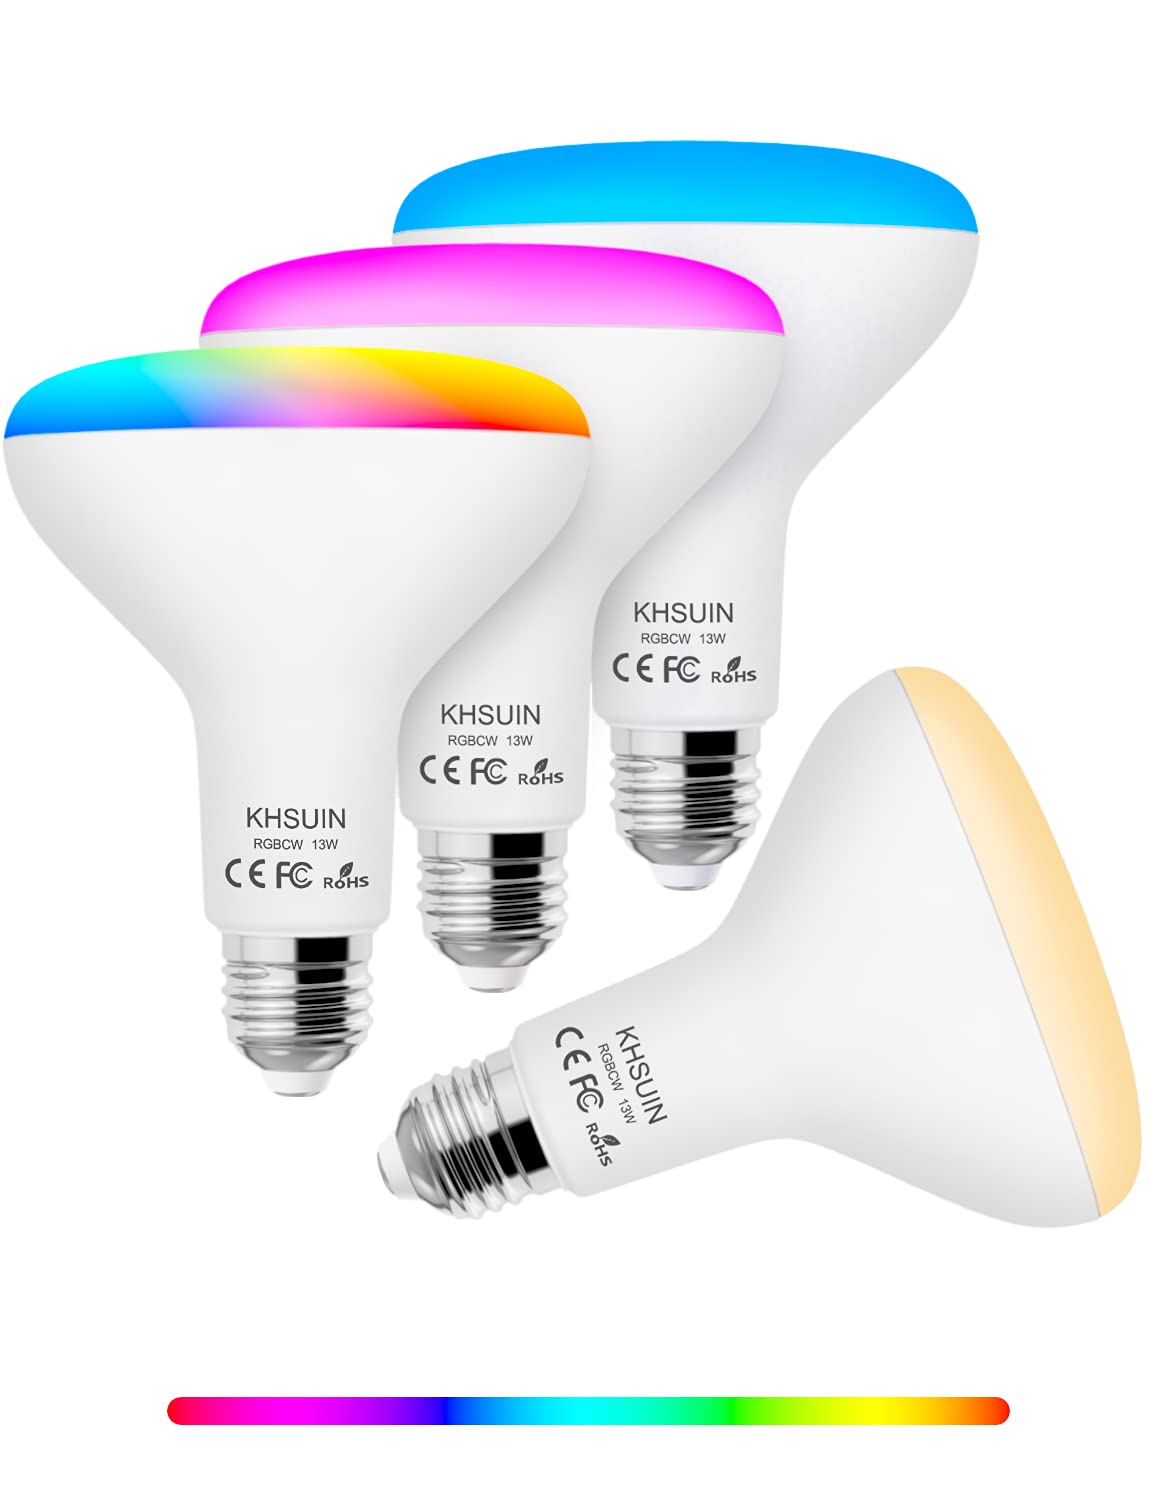 [2021 Upgrade] Smart Light Bulb,Color Changing Light Bulb Compatible with Alexa and GoogleAssistant(No Hub Required),2.4G WiFi E26 13W(100w Equival...